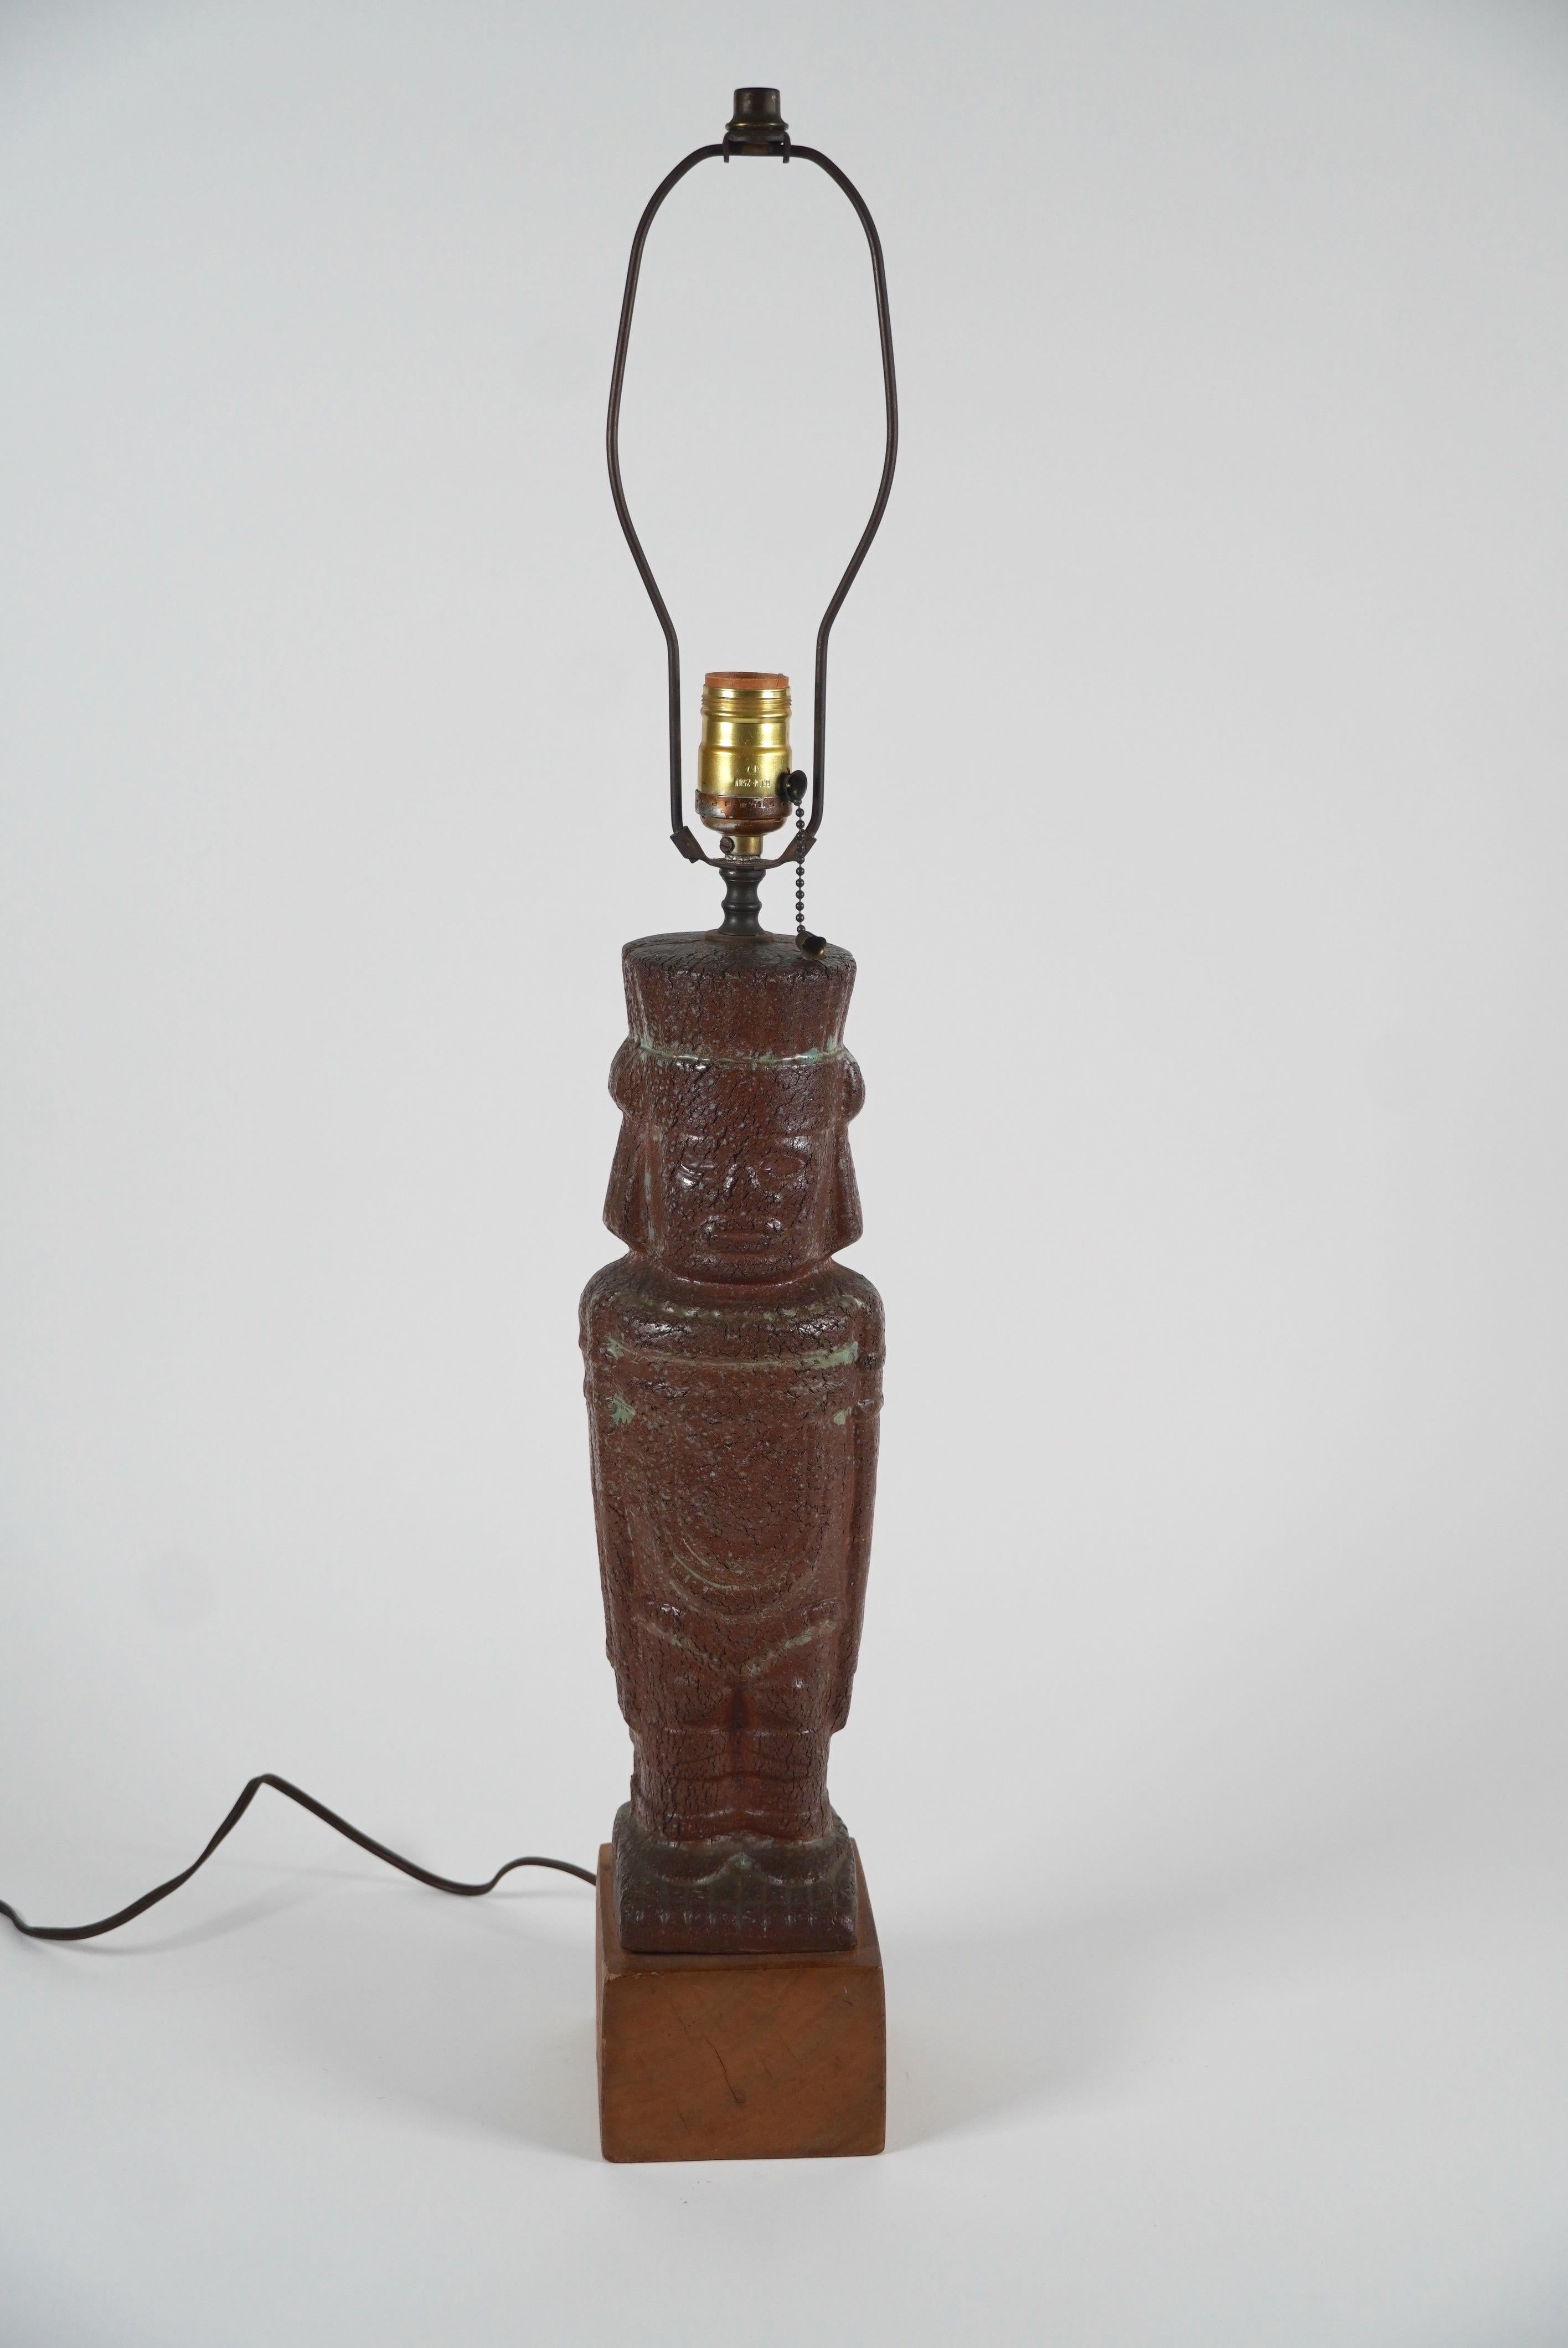 Hand-Crafted Ceramic Table Lamp with Aztec Motif, circa 1950s